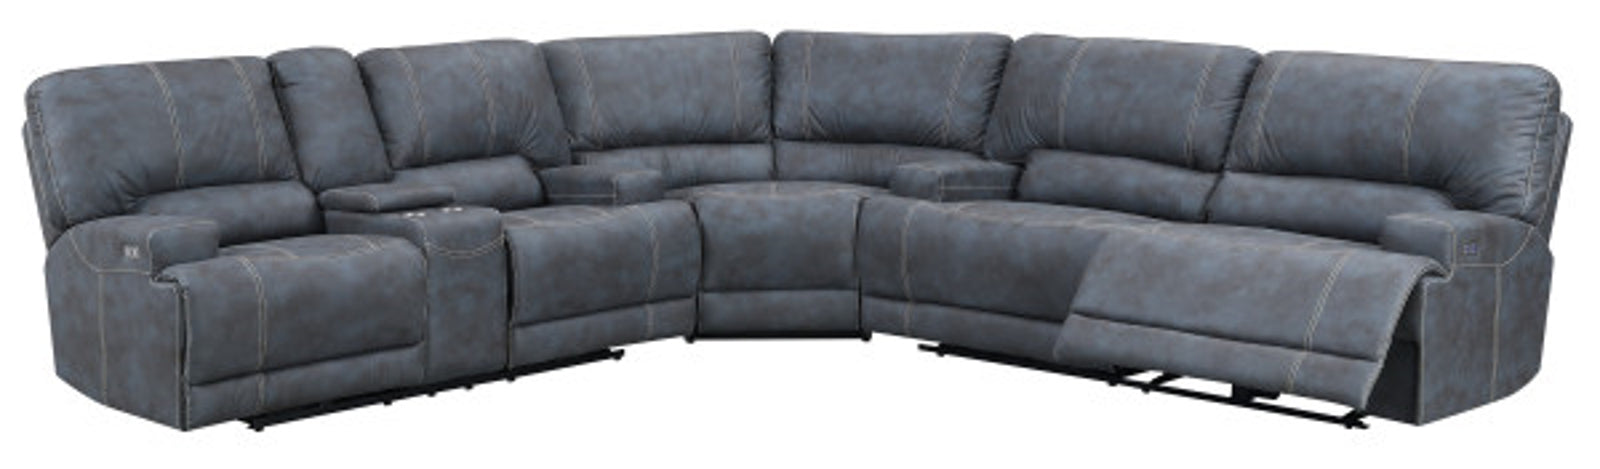 Emerald Home Furnishings Highland 3pc Sectional Sofa in Gray